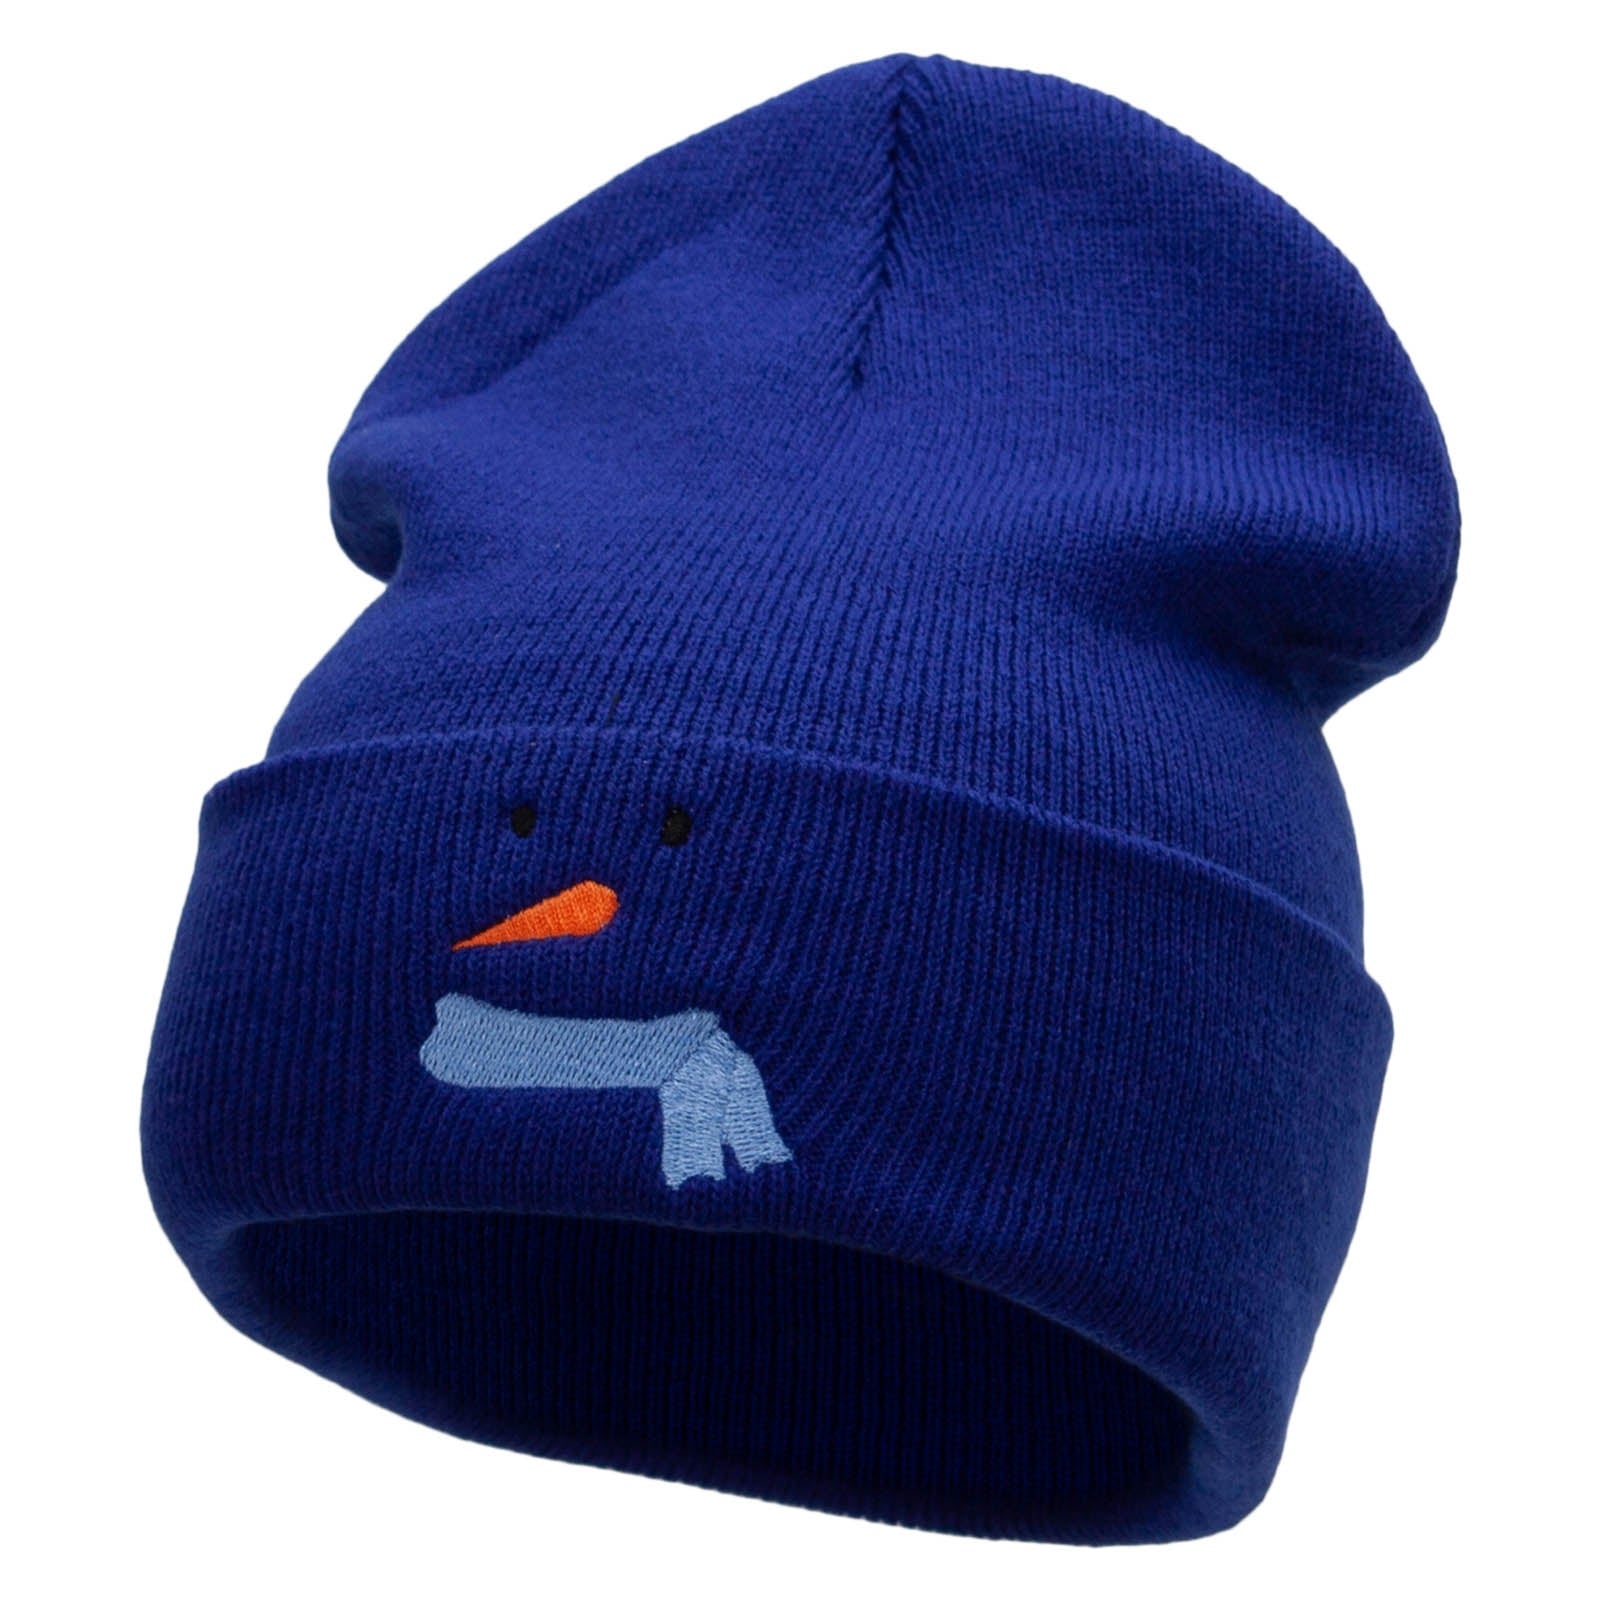 Minimal Snowman Embroidered 12 Inch Long Knitted Beanie - Royal OSFM